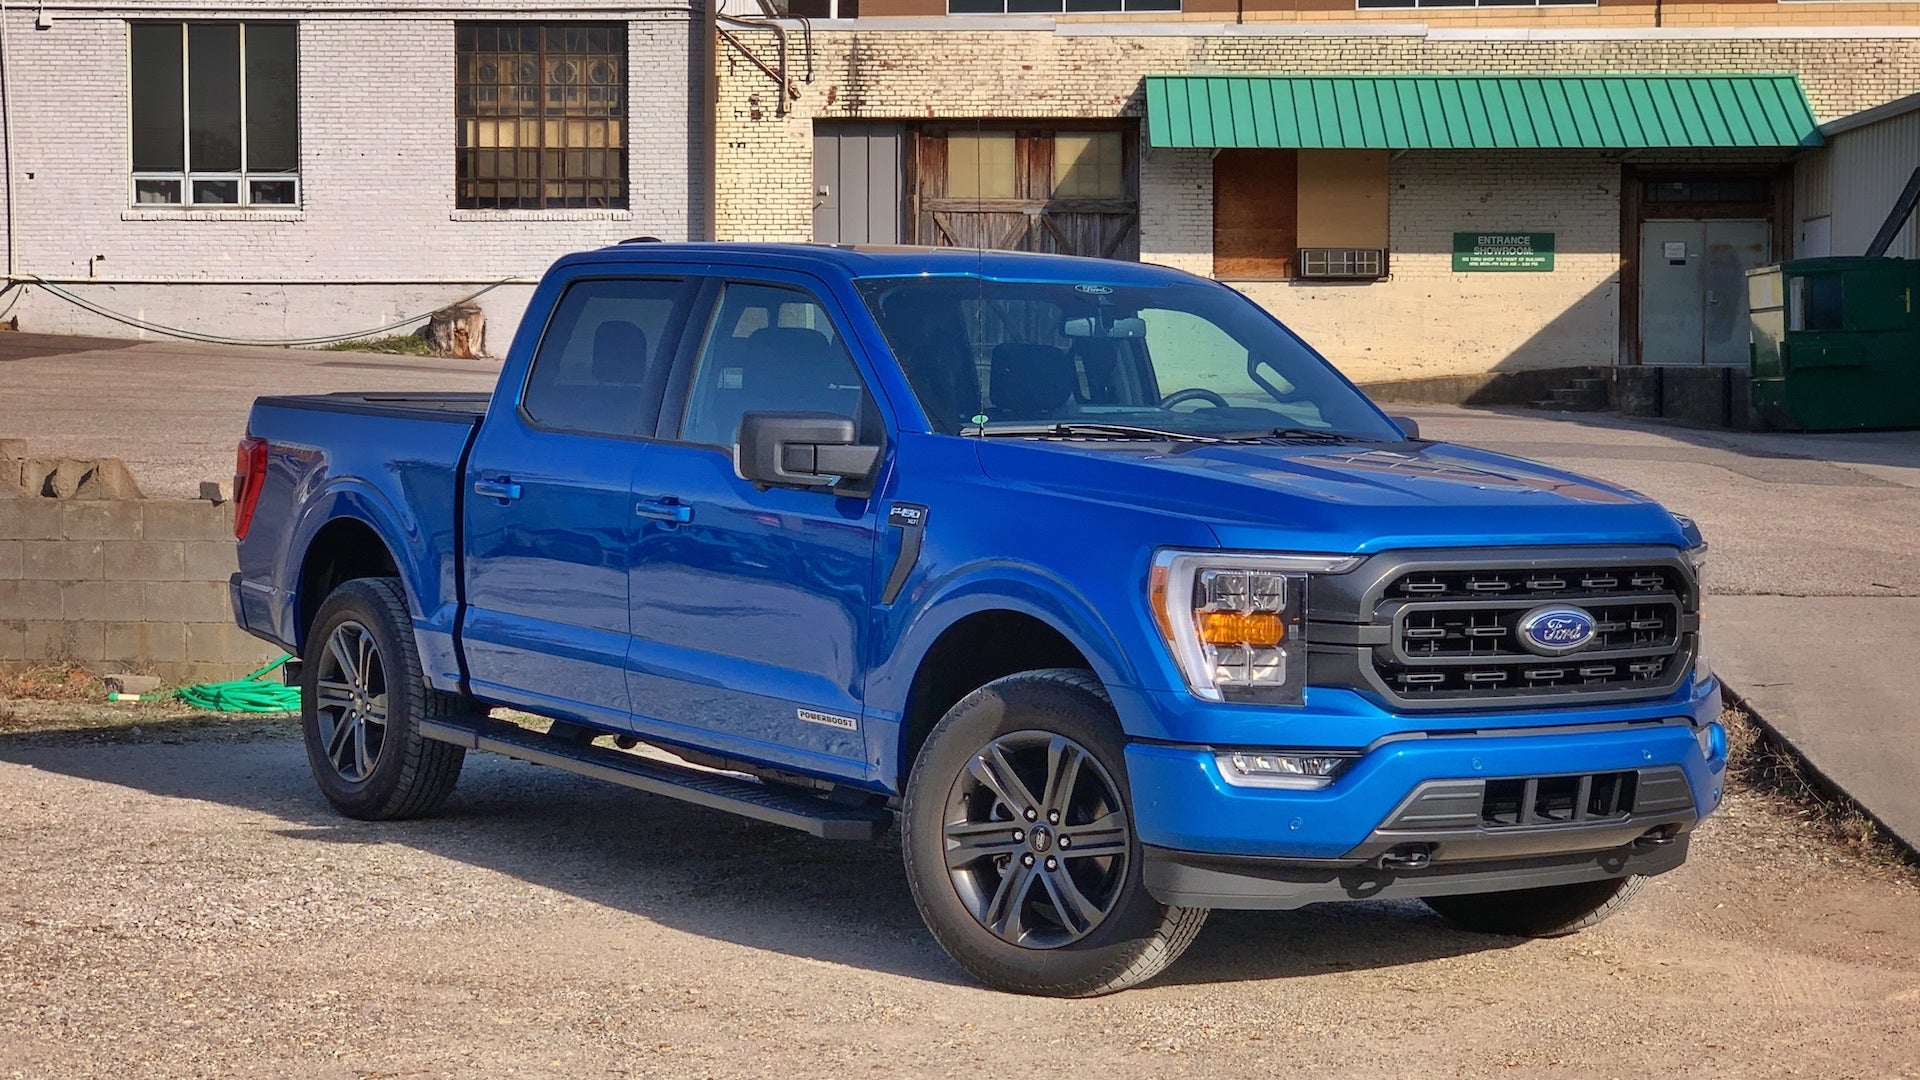 Review: 2021 Ford F-150 PowerBoost Hybrid Gets 720+ Happy Miles From